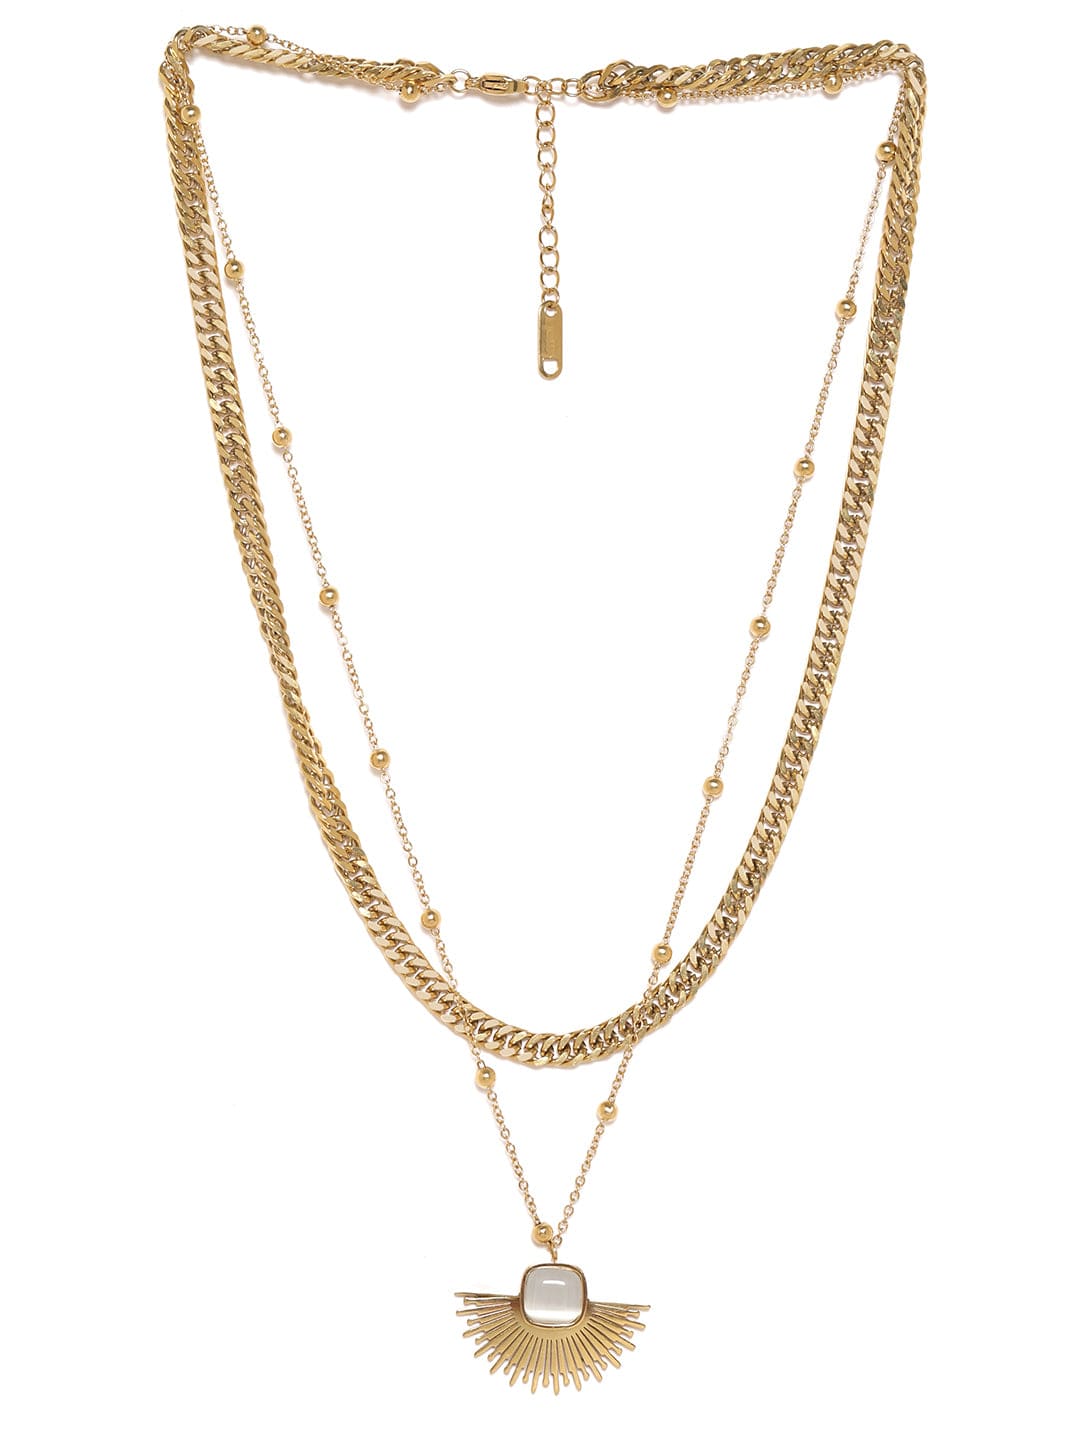 Gold plated Cuban Link Layered Chain  Necklaces, Necklace Sets, Chains &amp; Mangalsutra